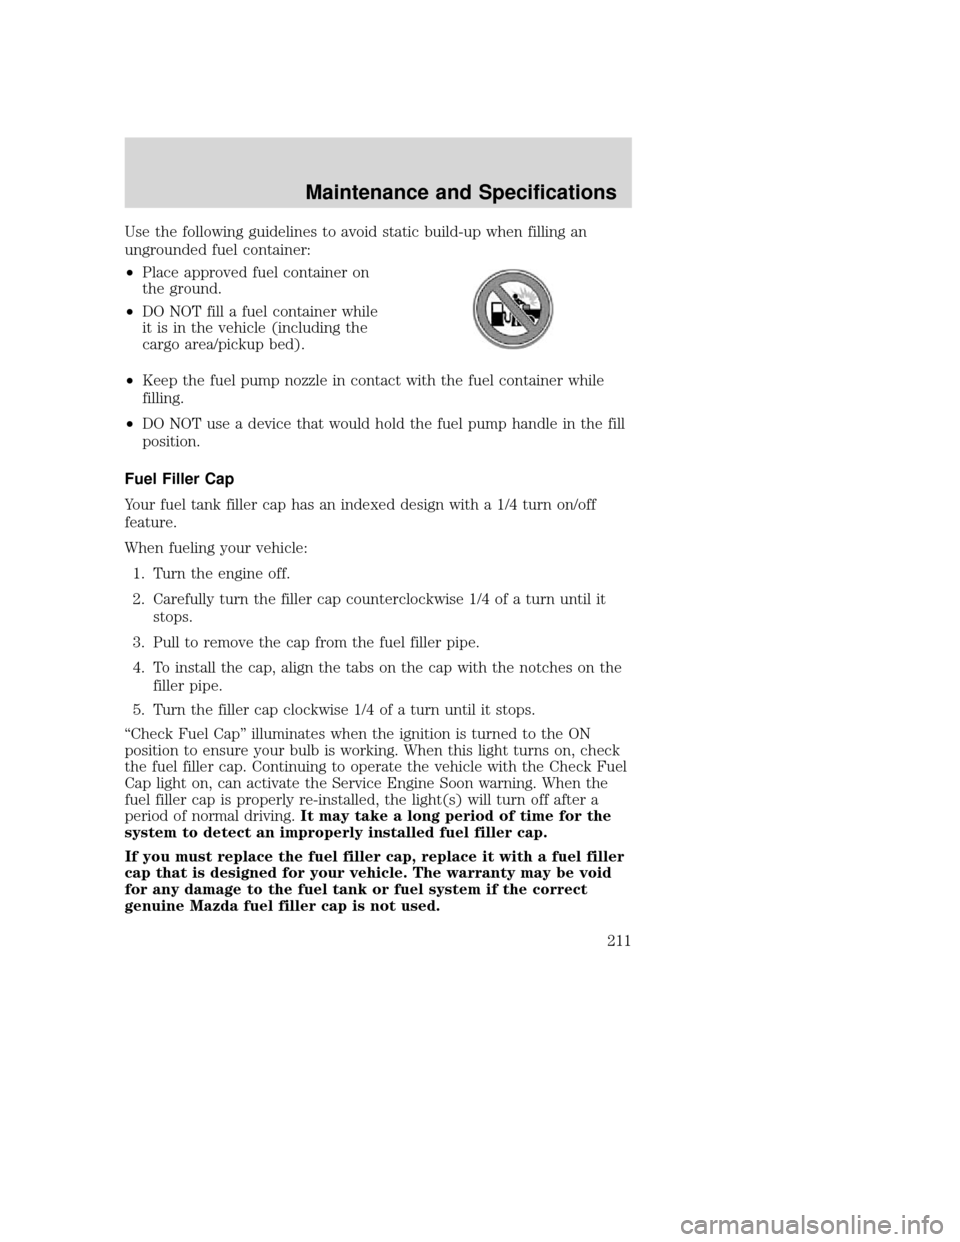 MAZDA MODEL B-SERIES 2004  Owners Manual (in English) Use the following guidelines to avoid static build-up when filling an
ungrounded fuel container:
•Place approved fuel container on
the ground.
• DO NOT fill a fuel container while
it is in the veh